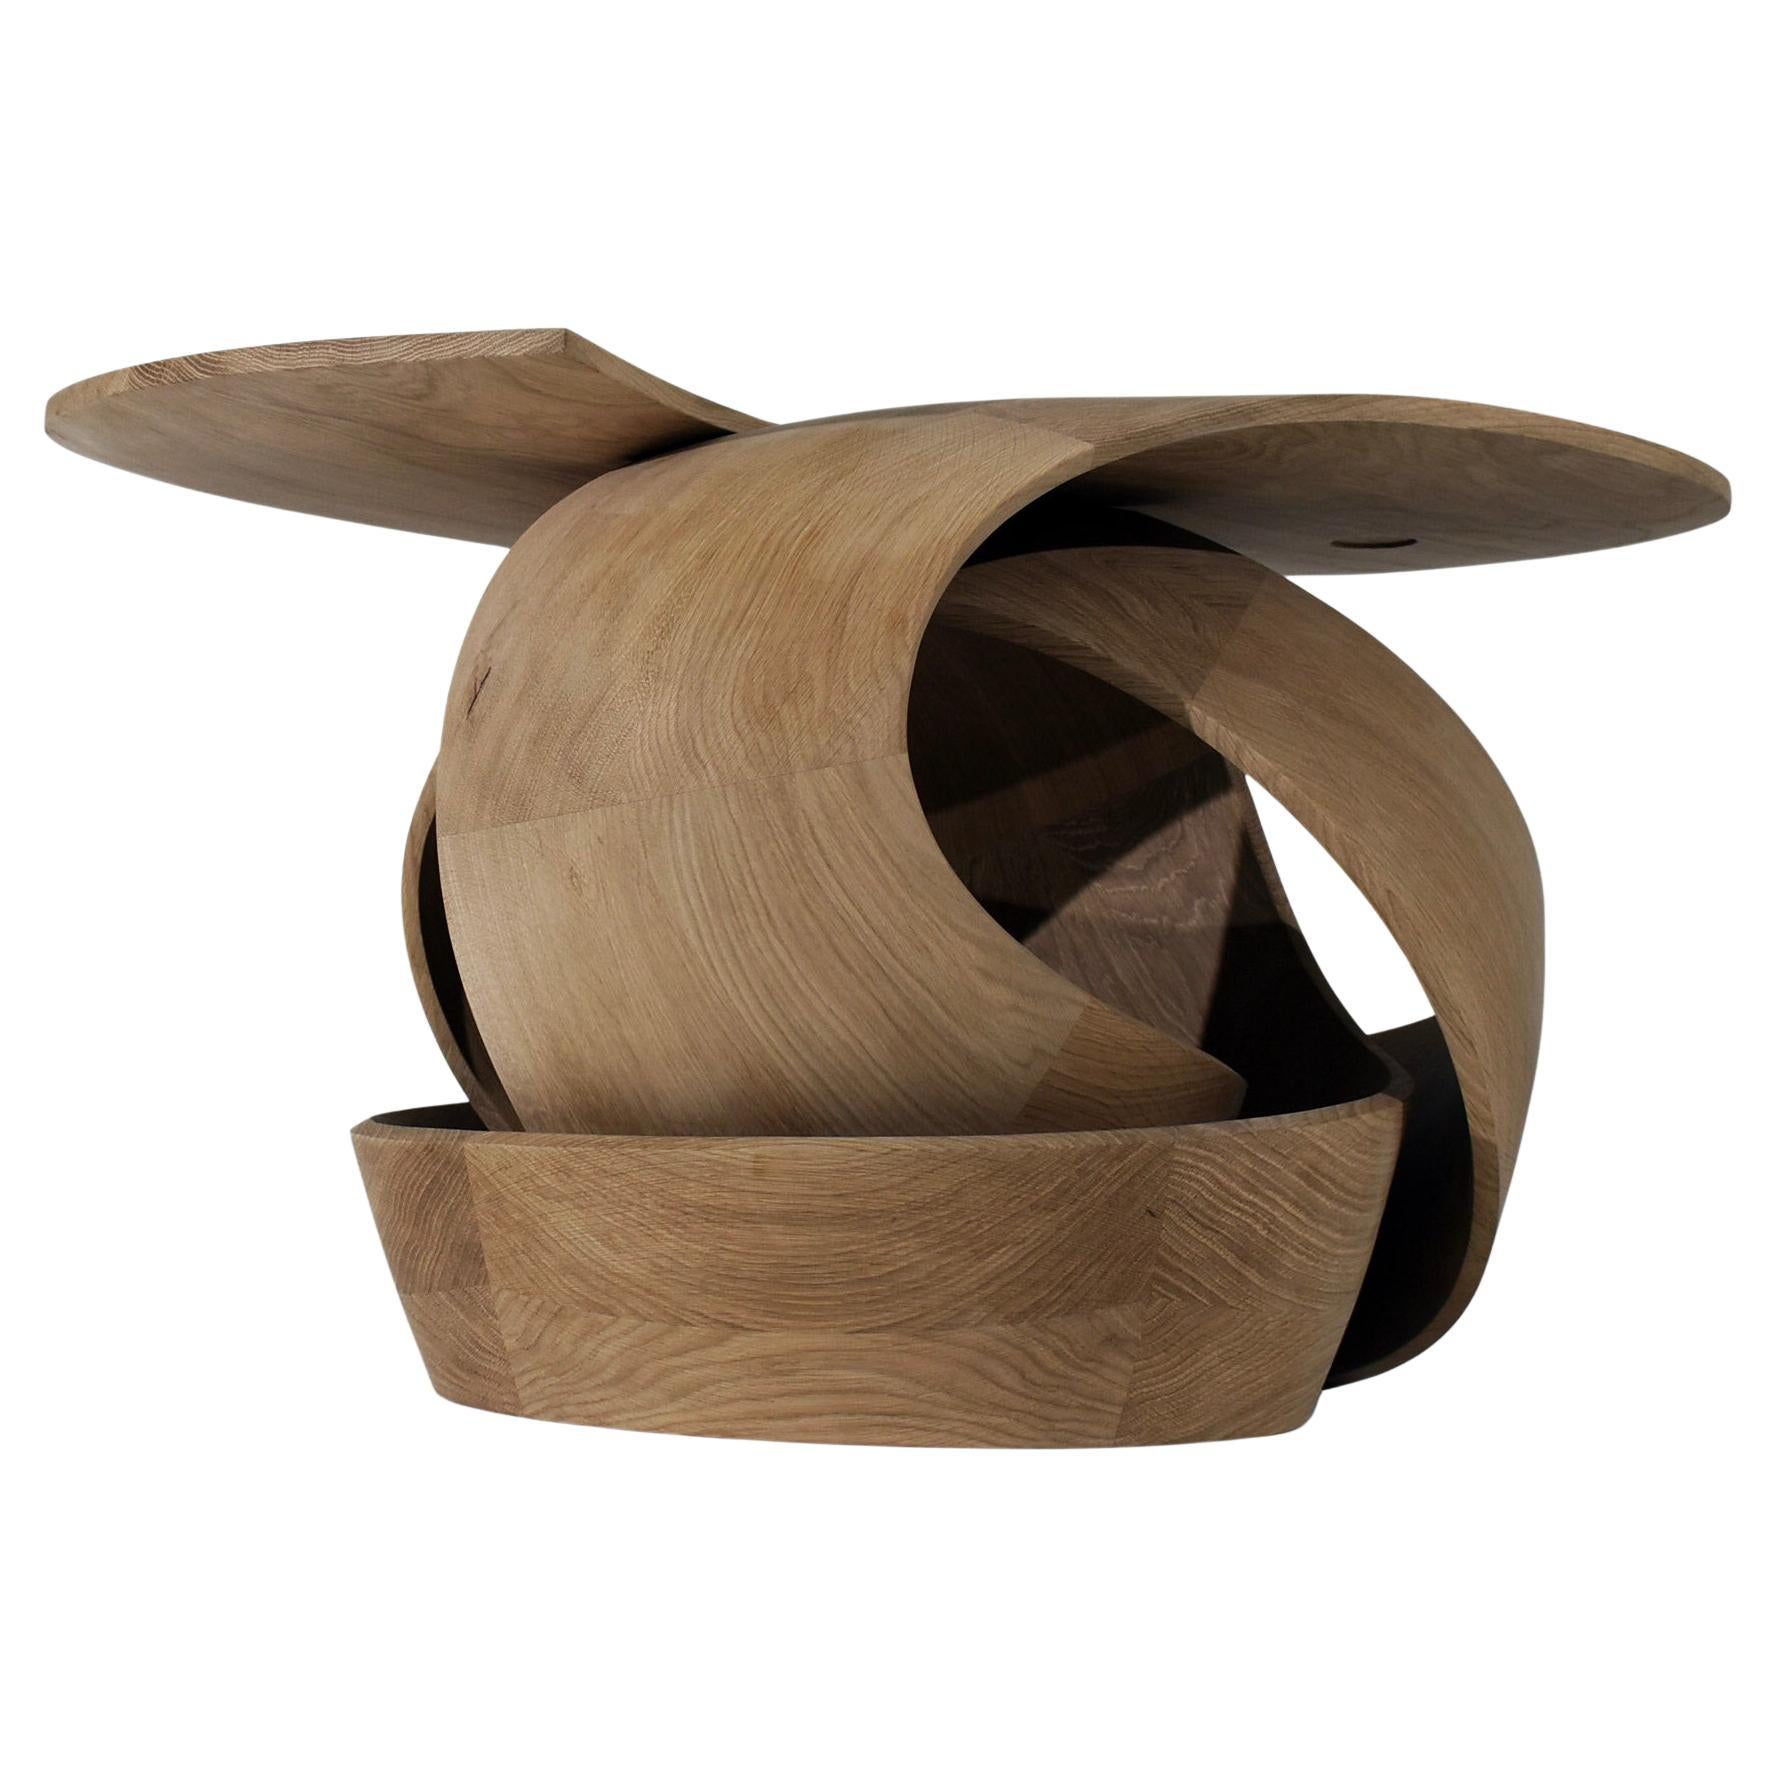 Sculptural 'knotted' side and/or coffee table in fumed oak by a master maker